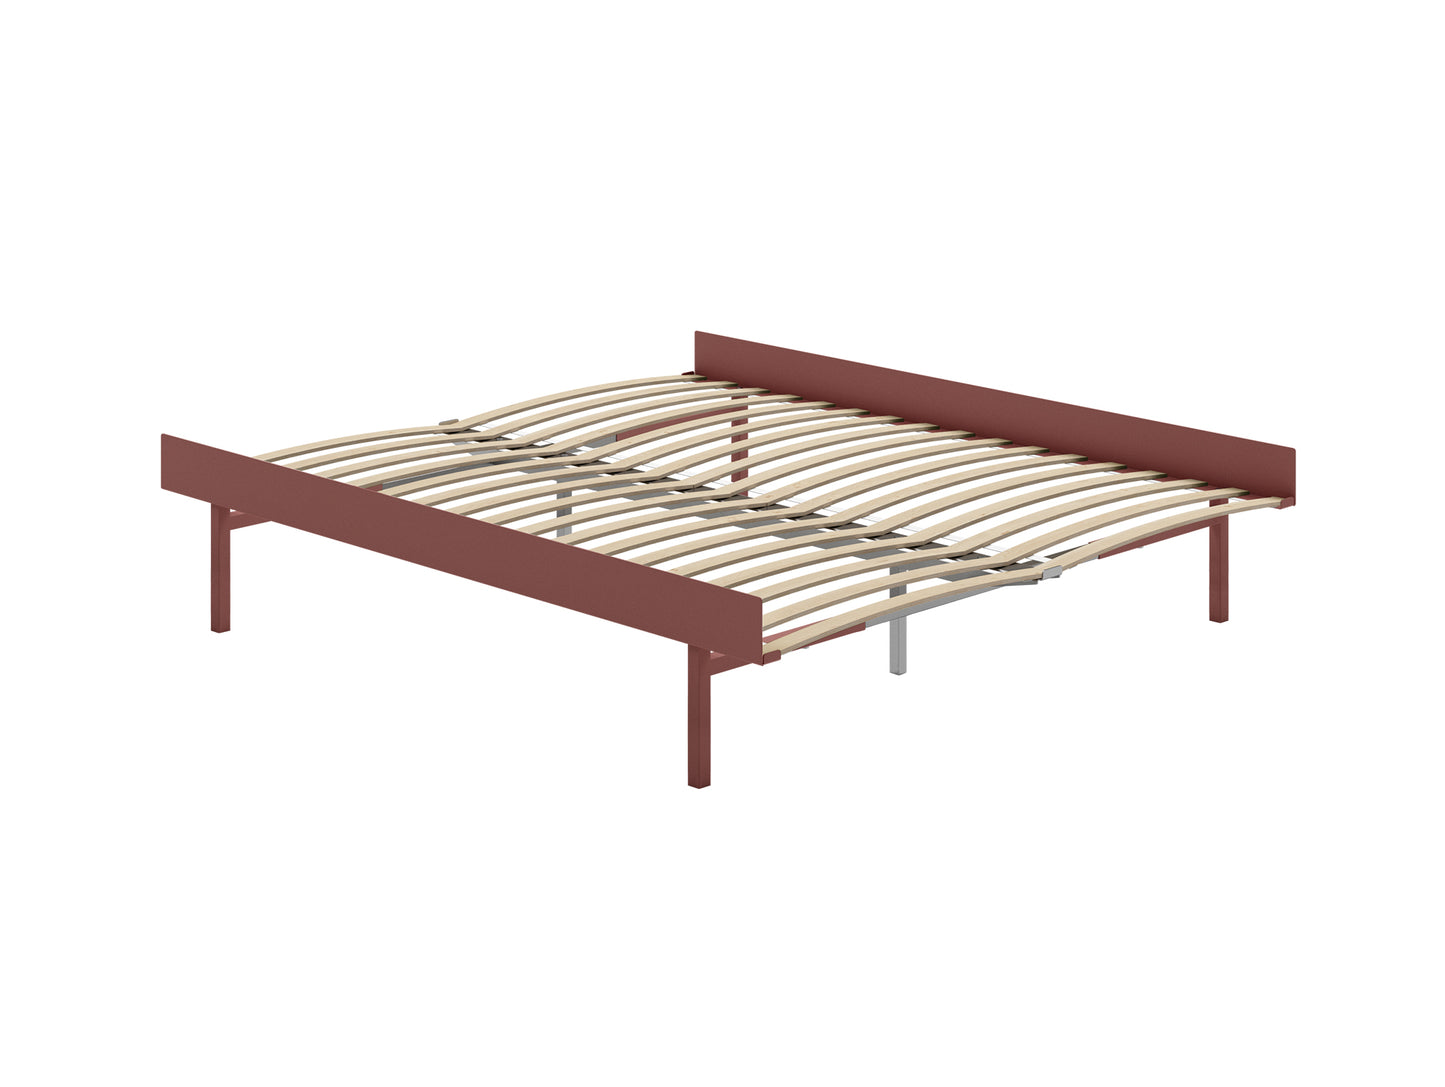 Bed 90 - 180 cm (High) by Moebe- Bed Frame / with 160cm wide Slats / Dusty Rose